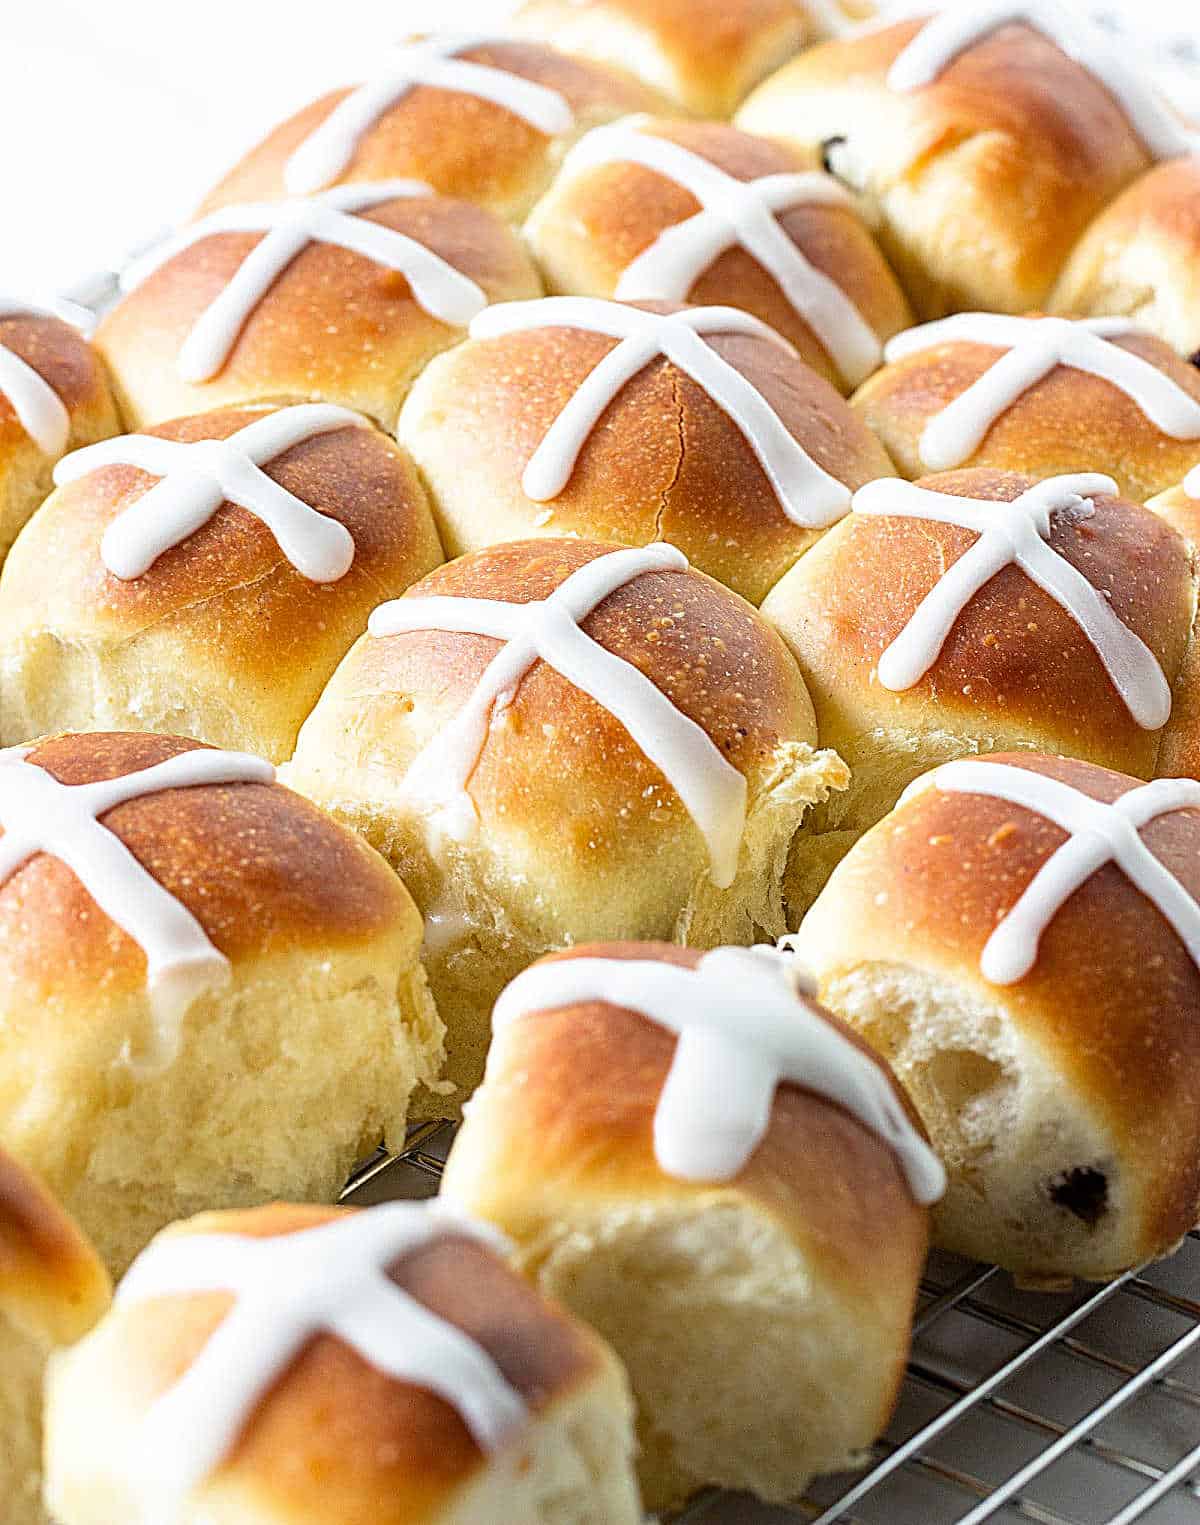 Rows of small buns with white cross on top.